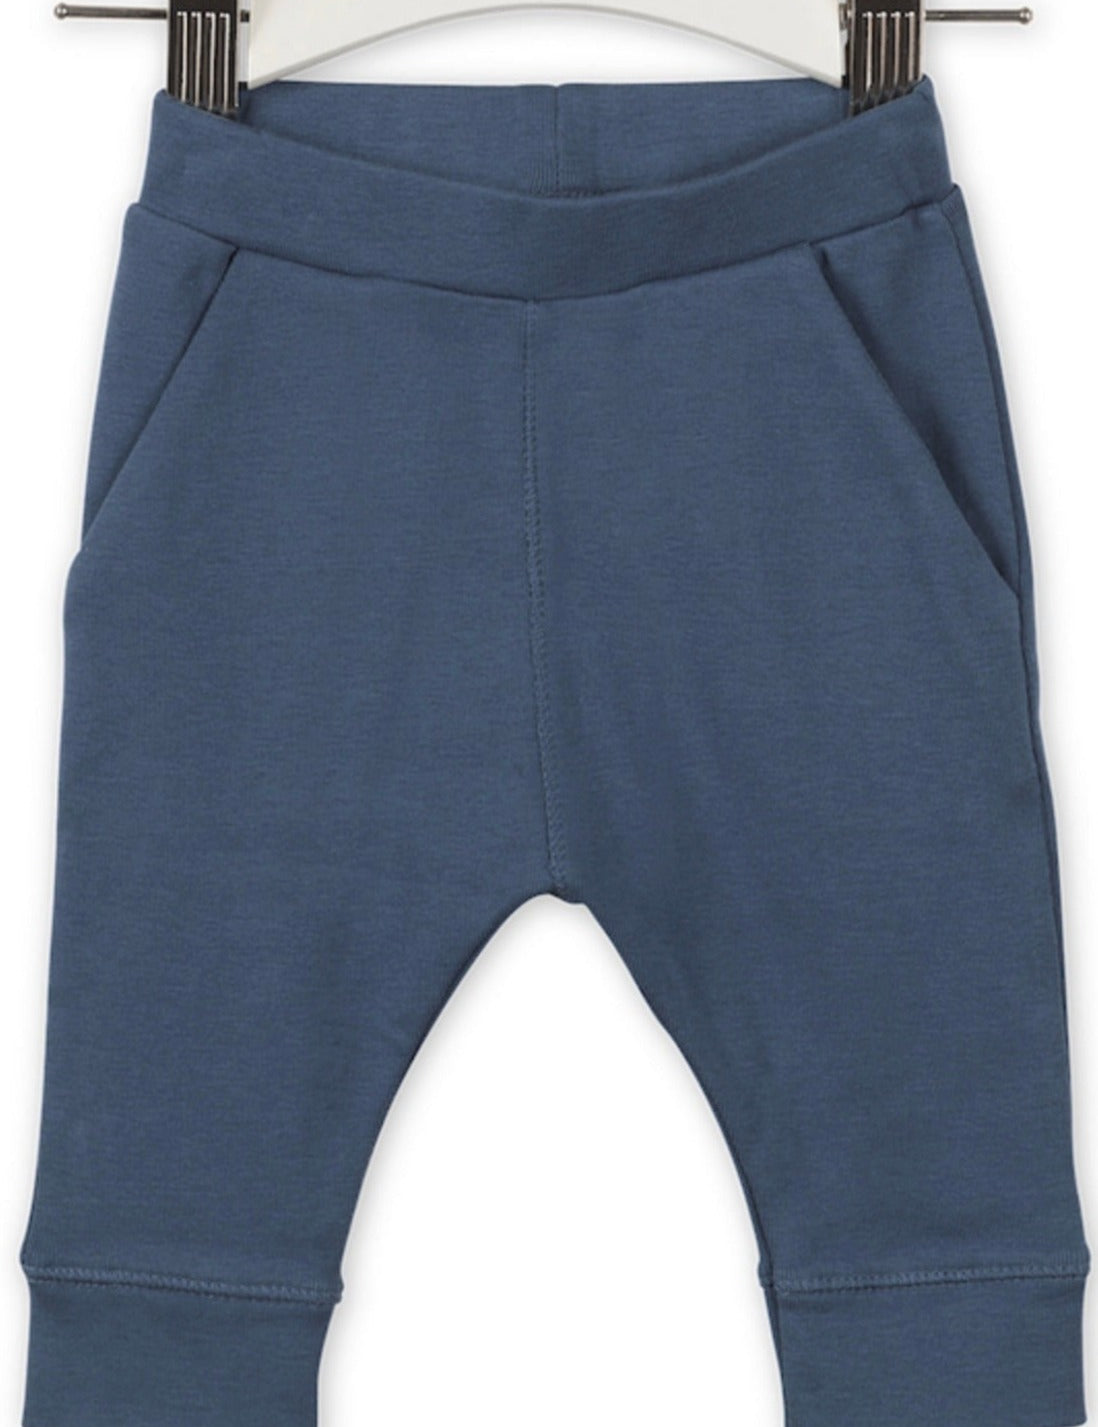 Imps & Elfs Pants in Organic Cotton for Mini Girls and Boys 0-12M - CapuletKids